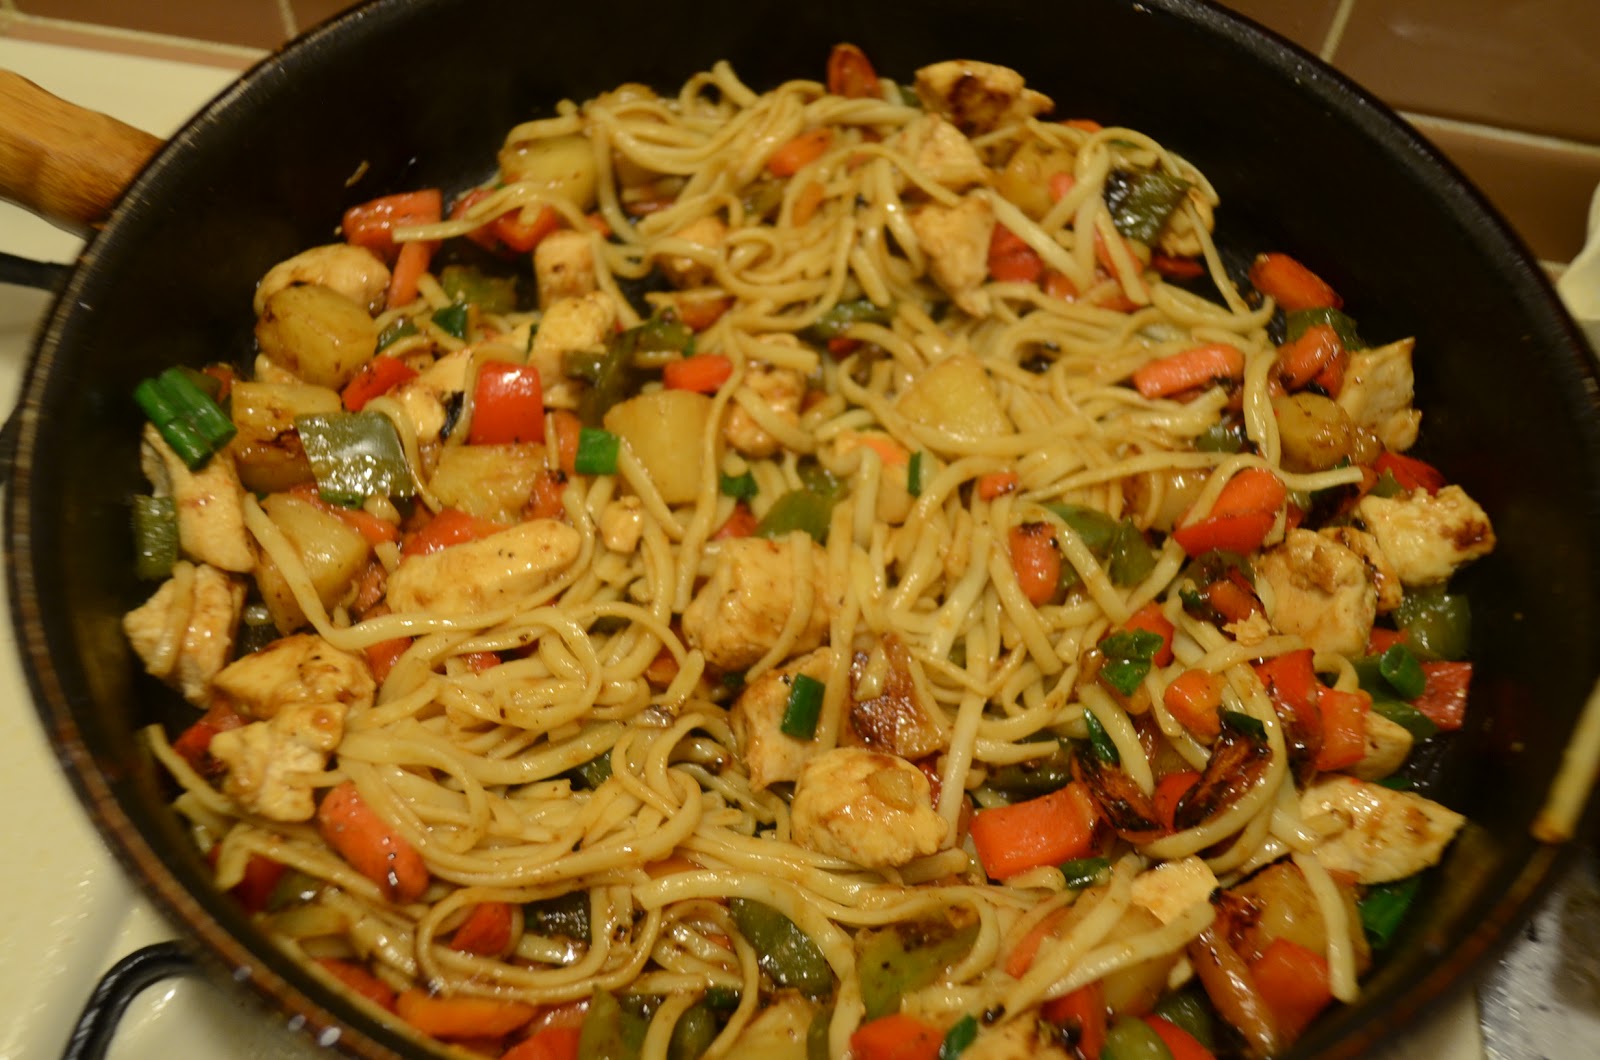 27 Years of Nothing but Failures: Pineapple Chicken Lo Mein